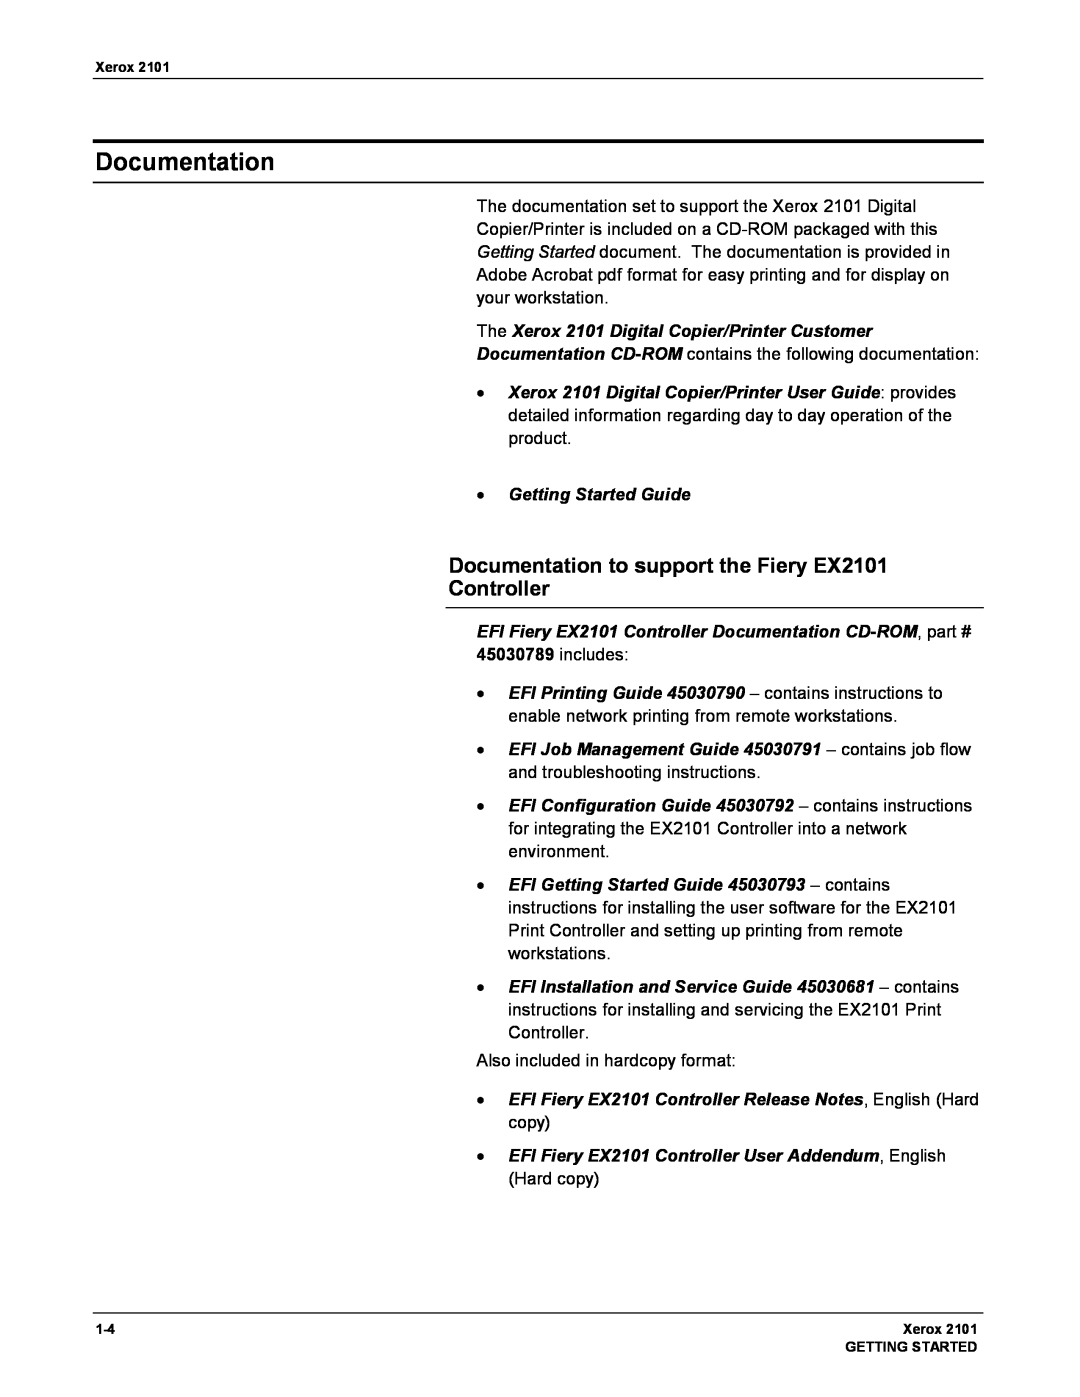 Xerox manual Documentation to support the Fiery EX2101, Controller, includes 